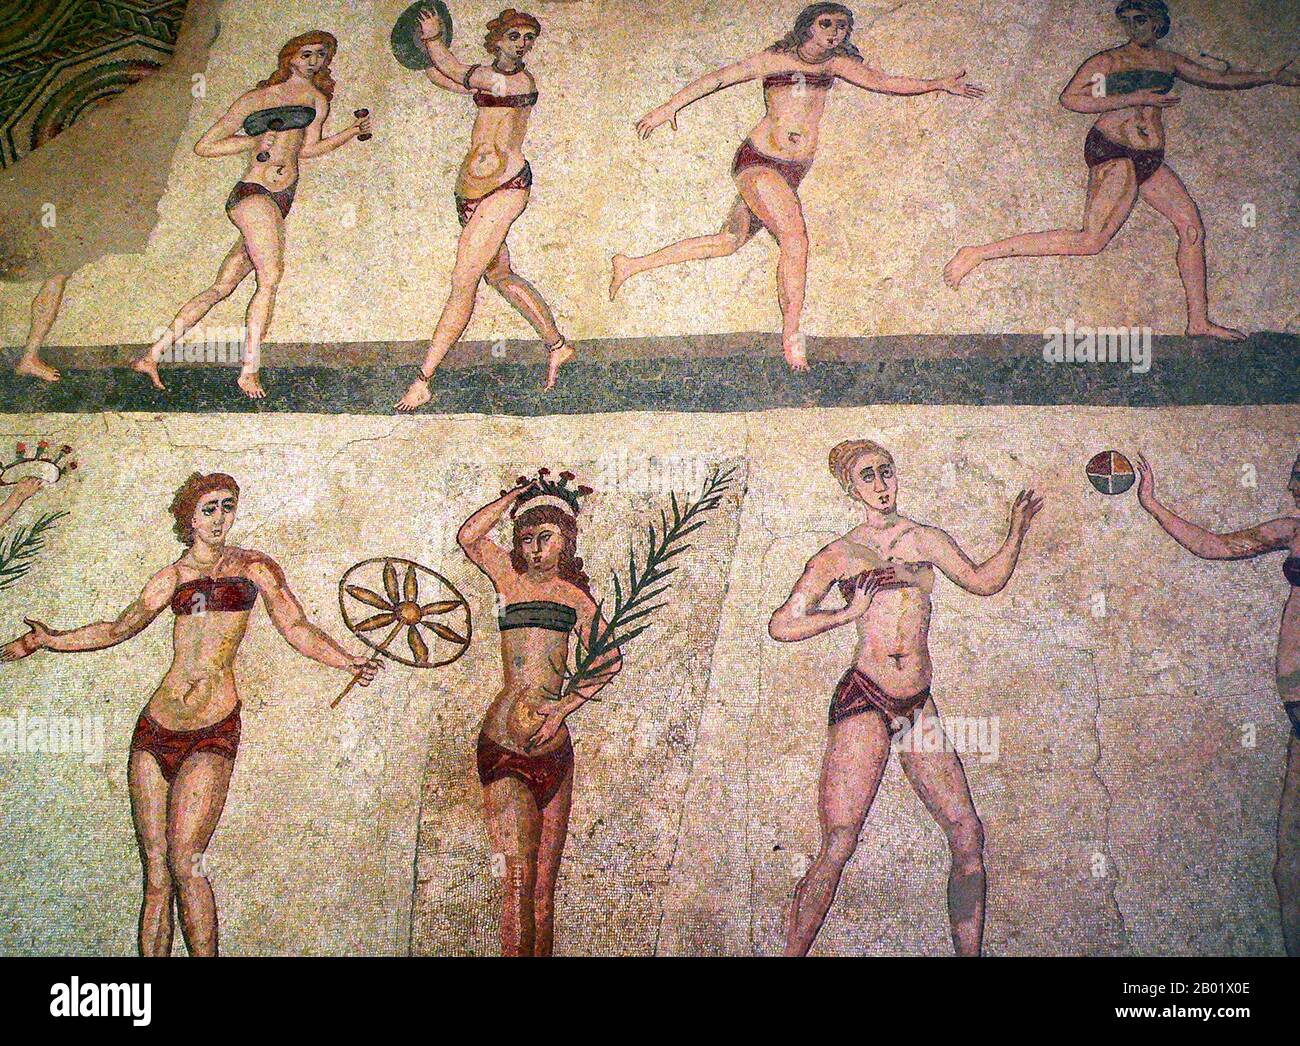 Italy: Roman women playing with a ball in a mosaic at Villa Romana del Casale. One of the so-called 'Bikini Mosaics', 4th century CE. Photo by M. Disdero (CC BY-SA 3.0 License).  Villa Romana del Casale (Sicilian: Villa Rumana dû Casali) is a Roman villa built in the first quarter of the 4th century CE and located about 5 km outside the town of Piazza Armerina, Sicily, southern Italy. Containing the richest, largest and most complex collection of Roman mosaics in the world, it is one of 44 UNESCO World Heritage Sites in Italy. Stock Photo